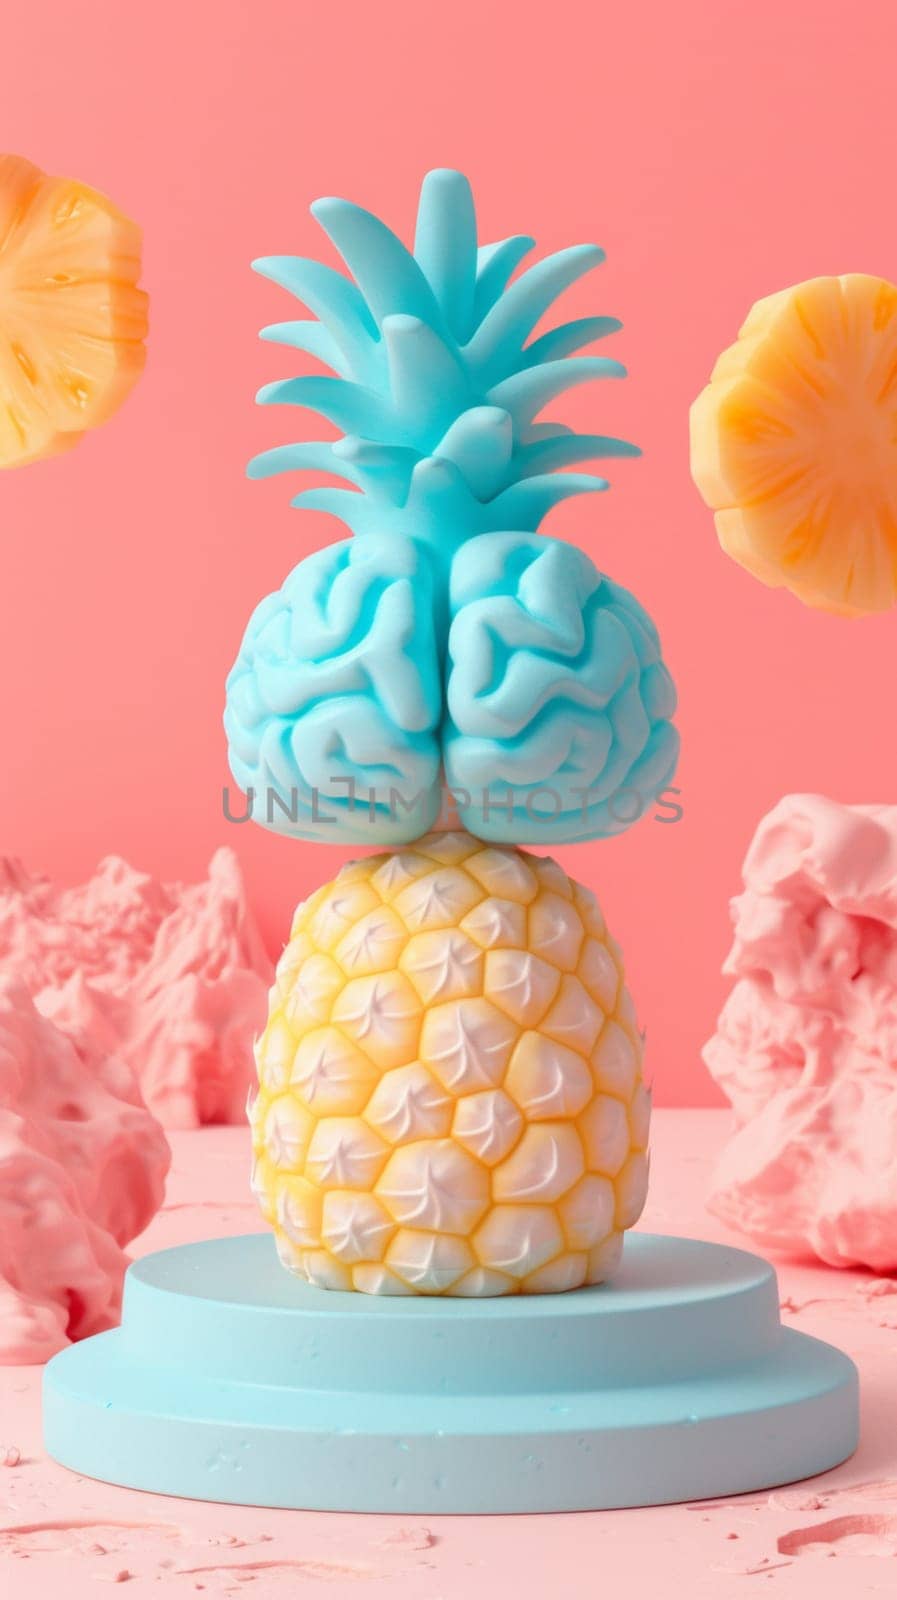 A pineapple with a brain on top of it and some other fruit, AI by starush